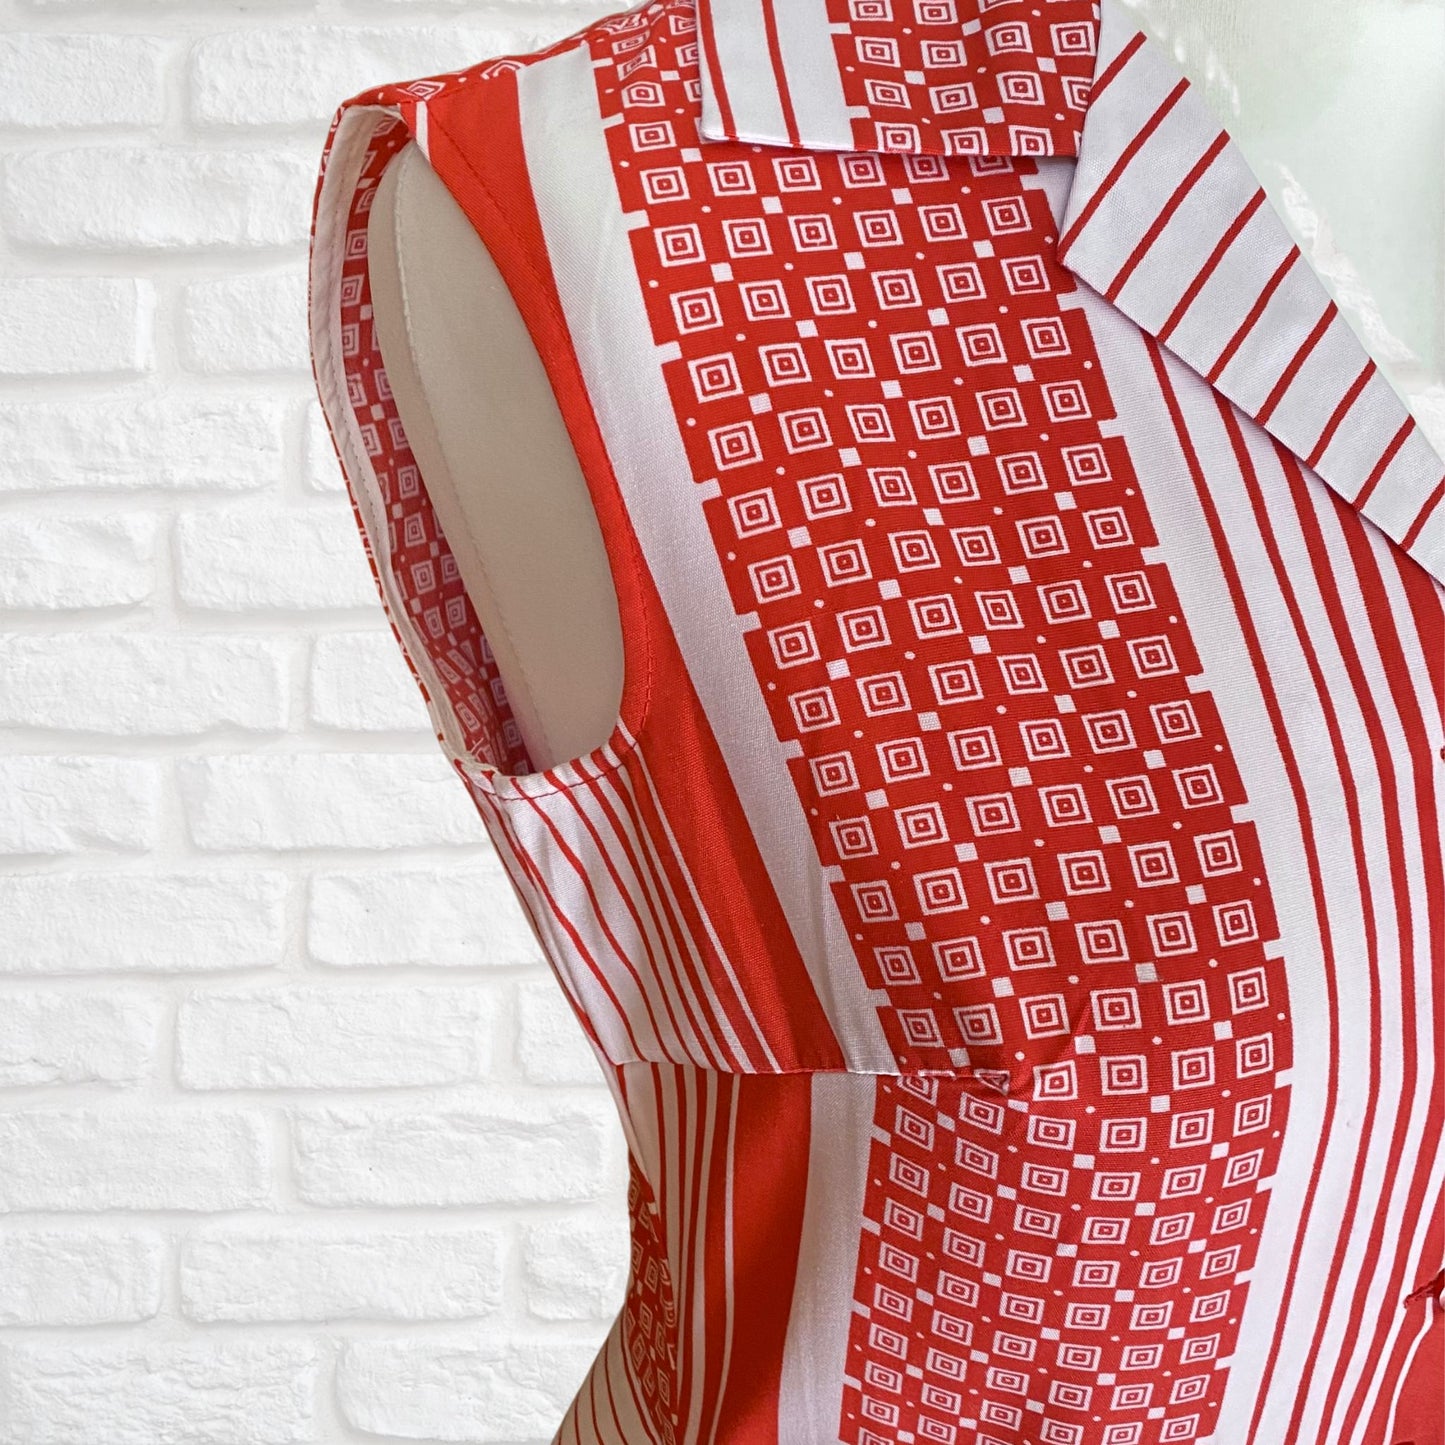 Vintage red and white open collar geometric and striped midi dress. Approx UK size 8- 10